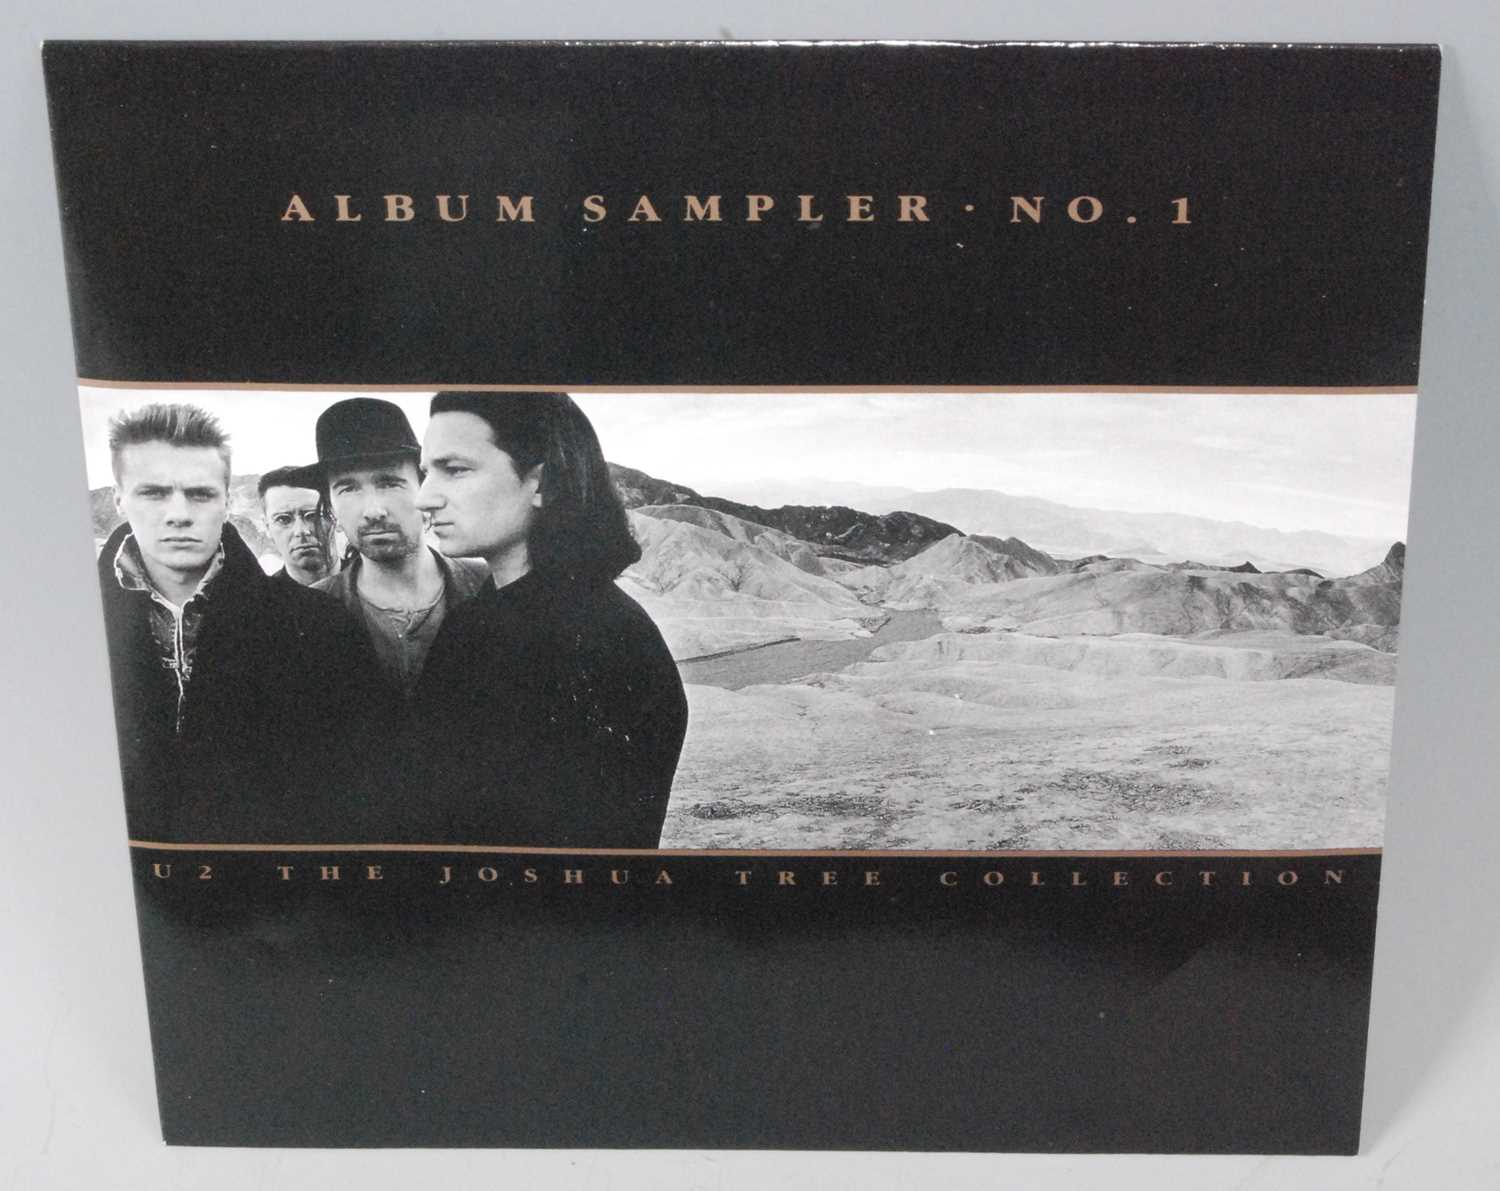 U2, The Joshua Tree Collection, a set of five 7" singles from the 1987 Joshua Tree album, each - Image 3 of 5